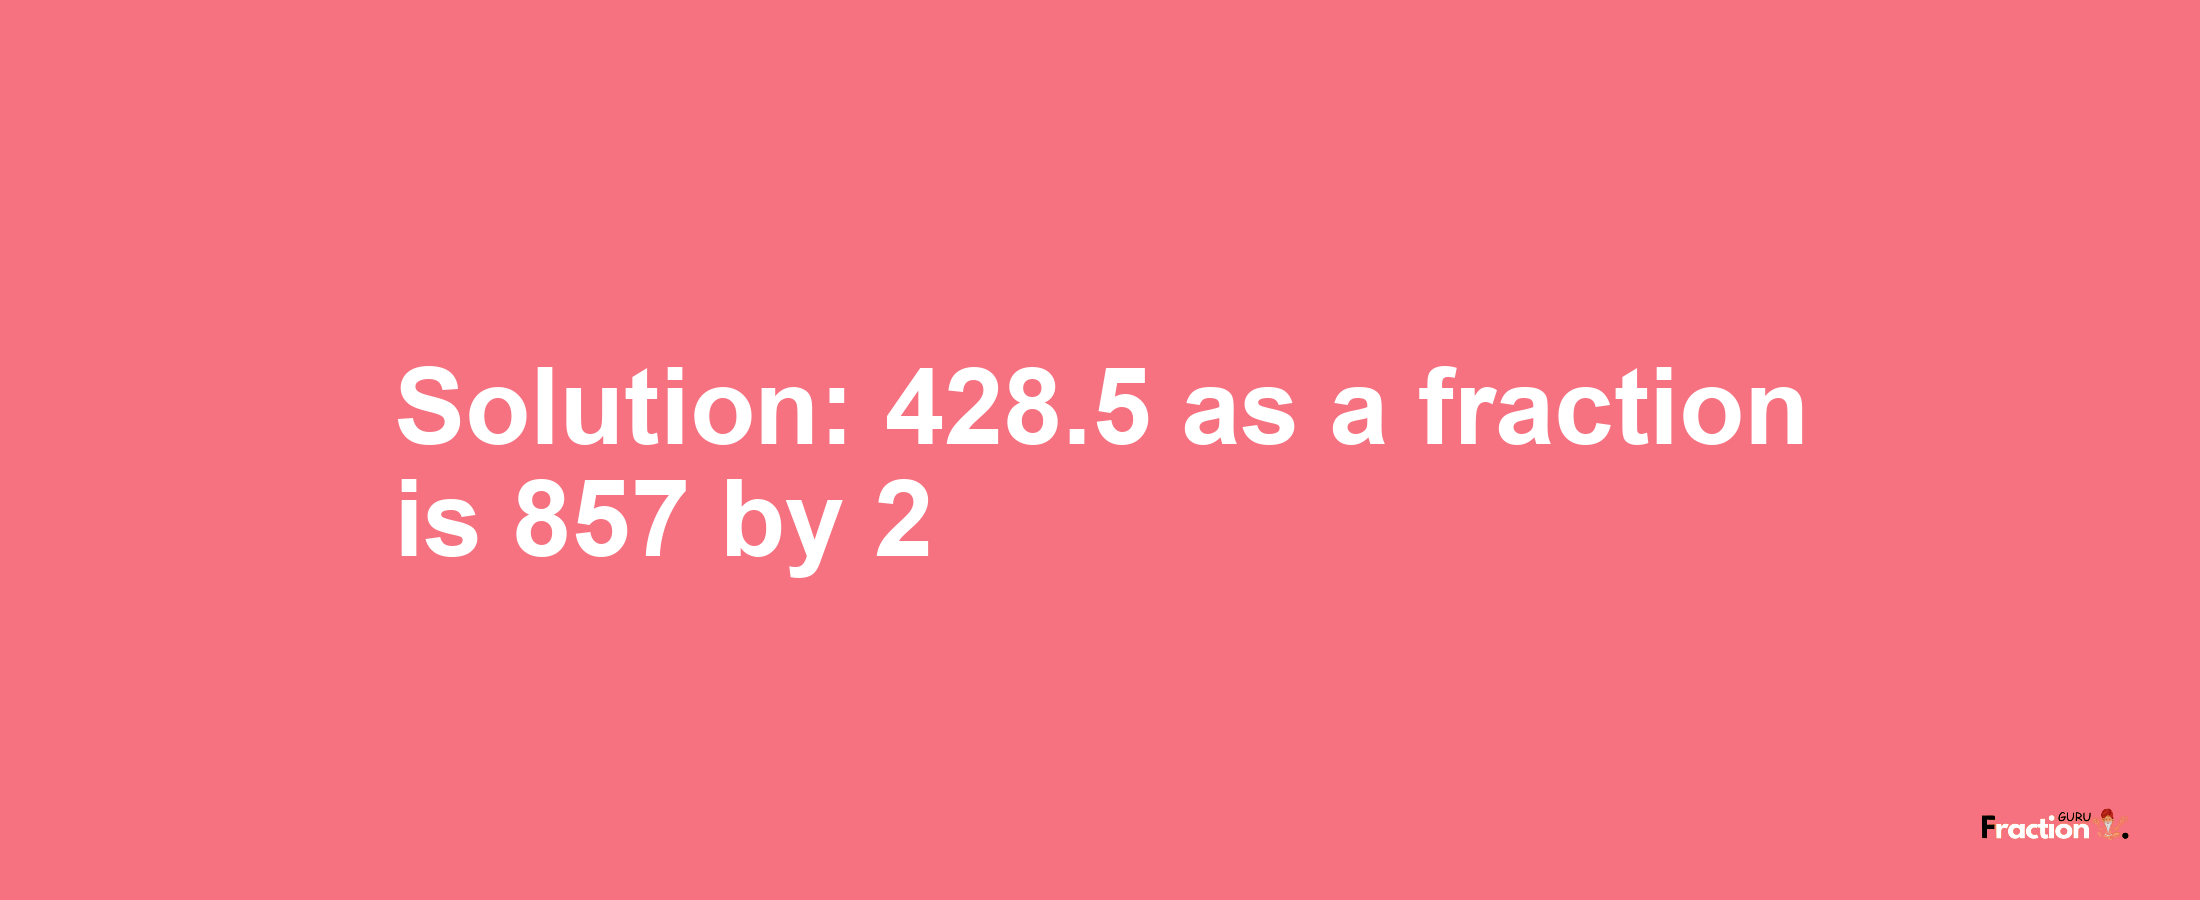 Solution:428.5 as a fraction is 857/2